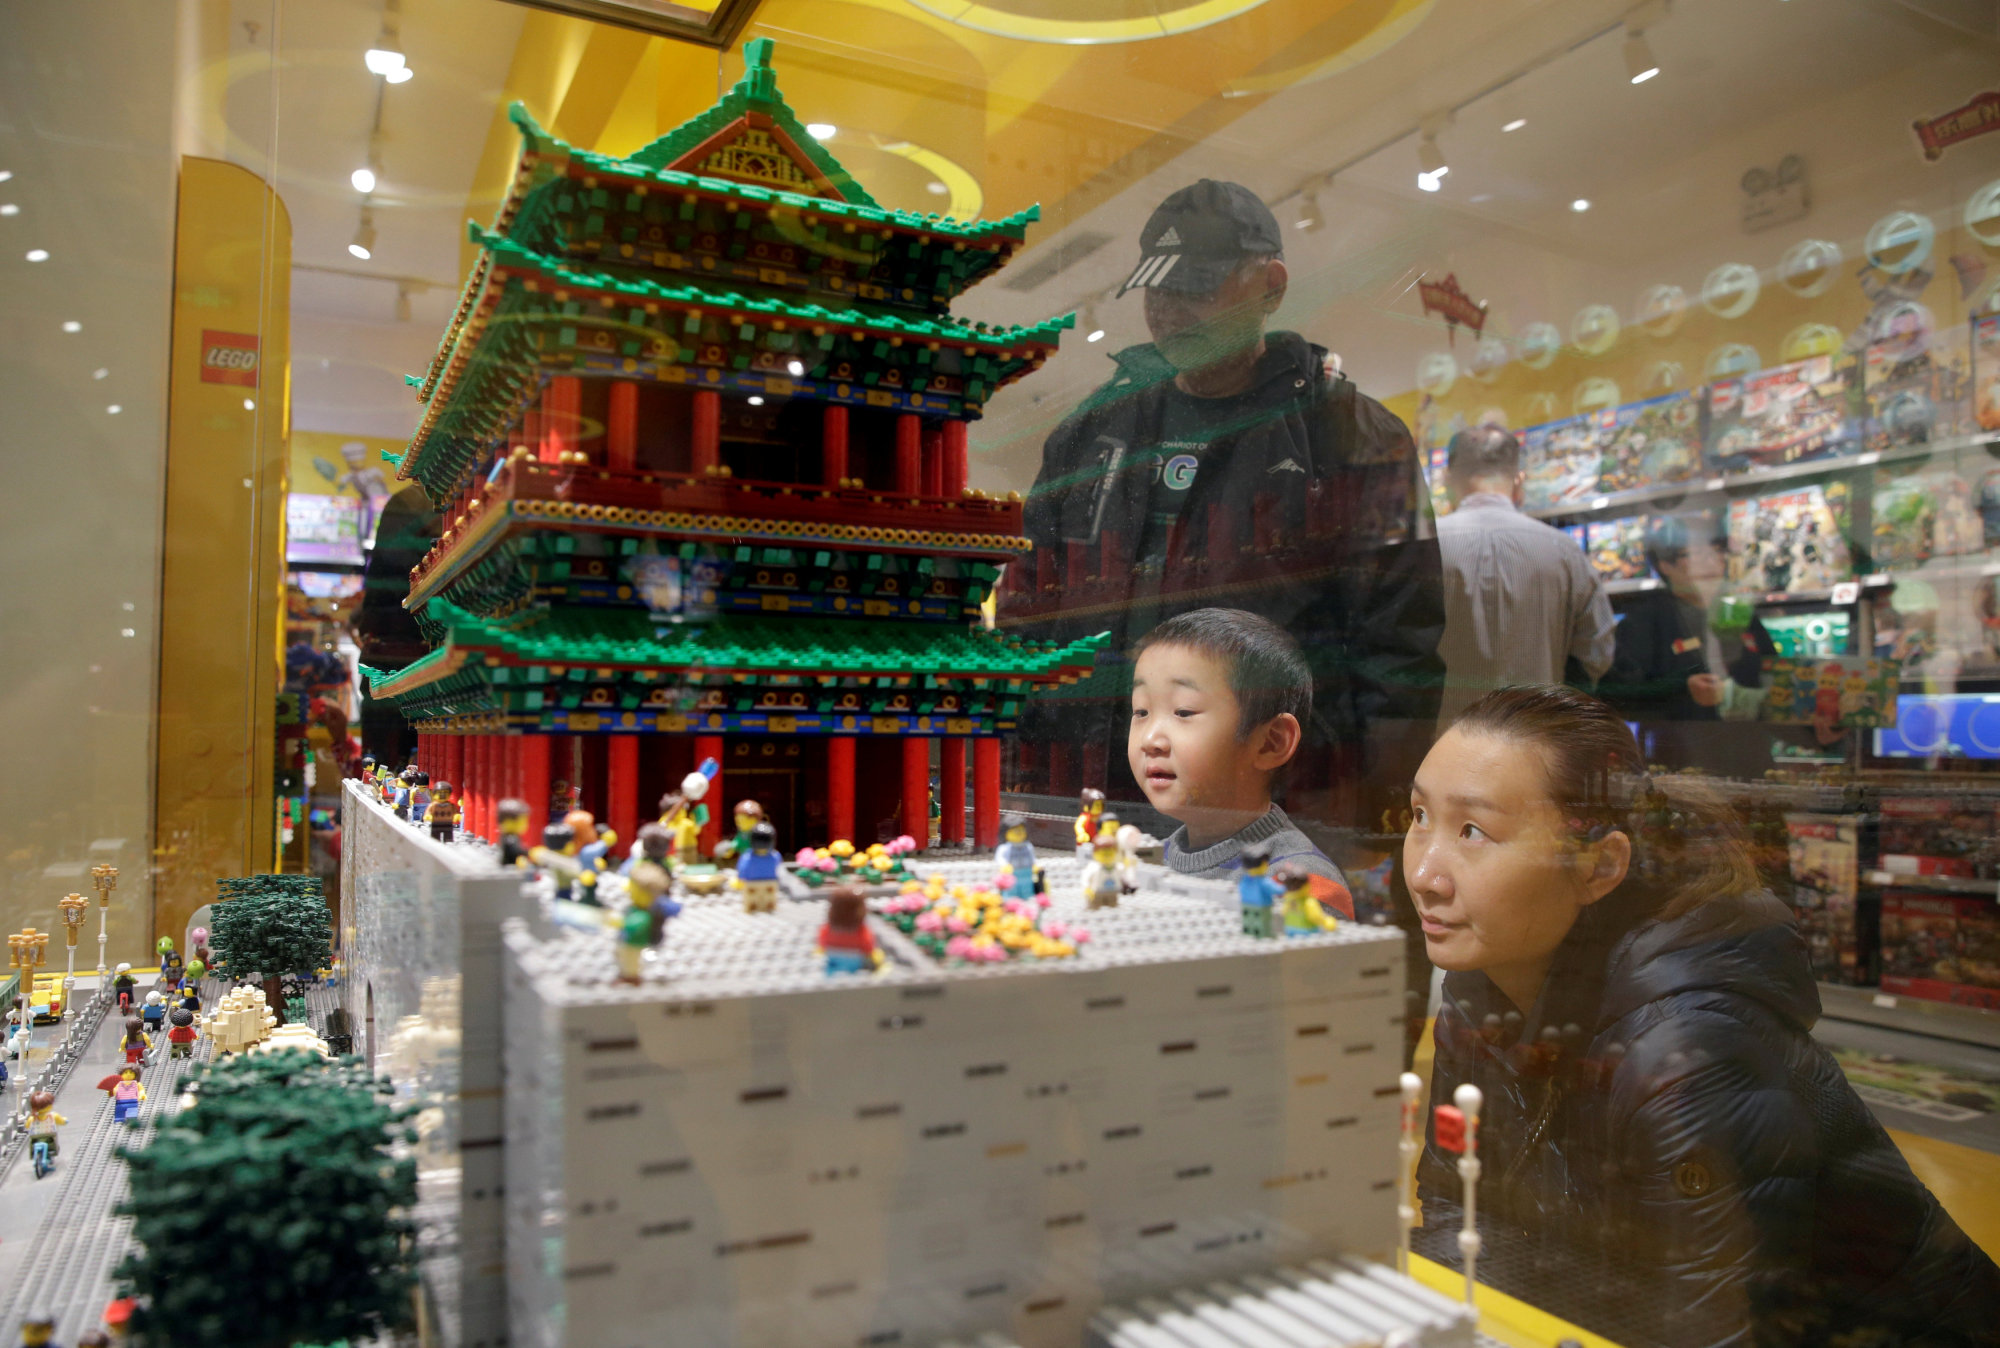 Dyrke motion Salme Udvinding Lego to open 80 new toy shops in China this year - The Japan Times